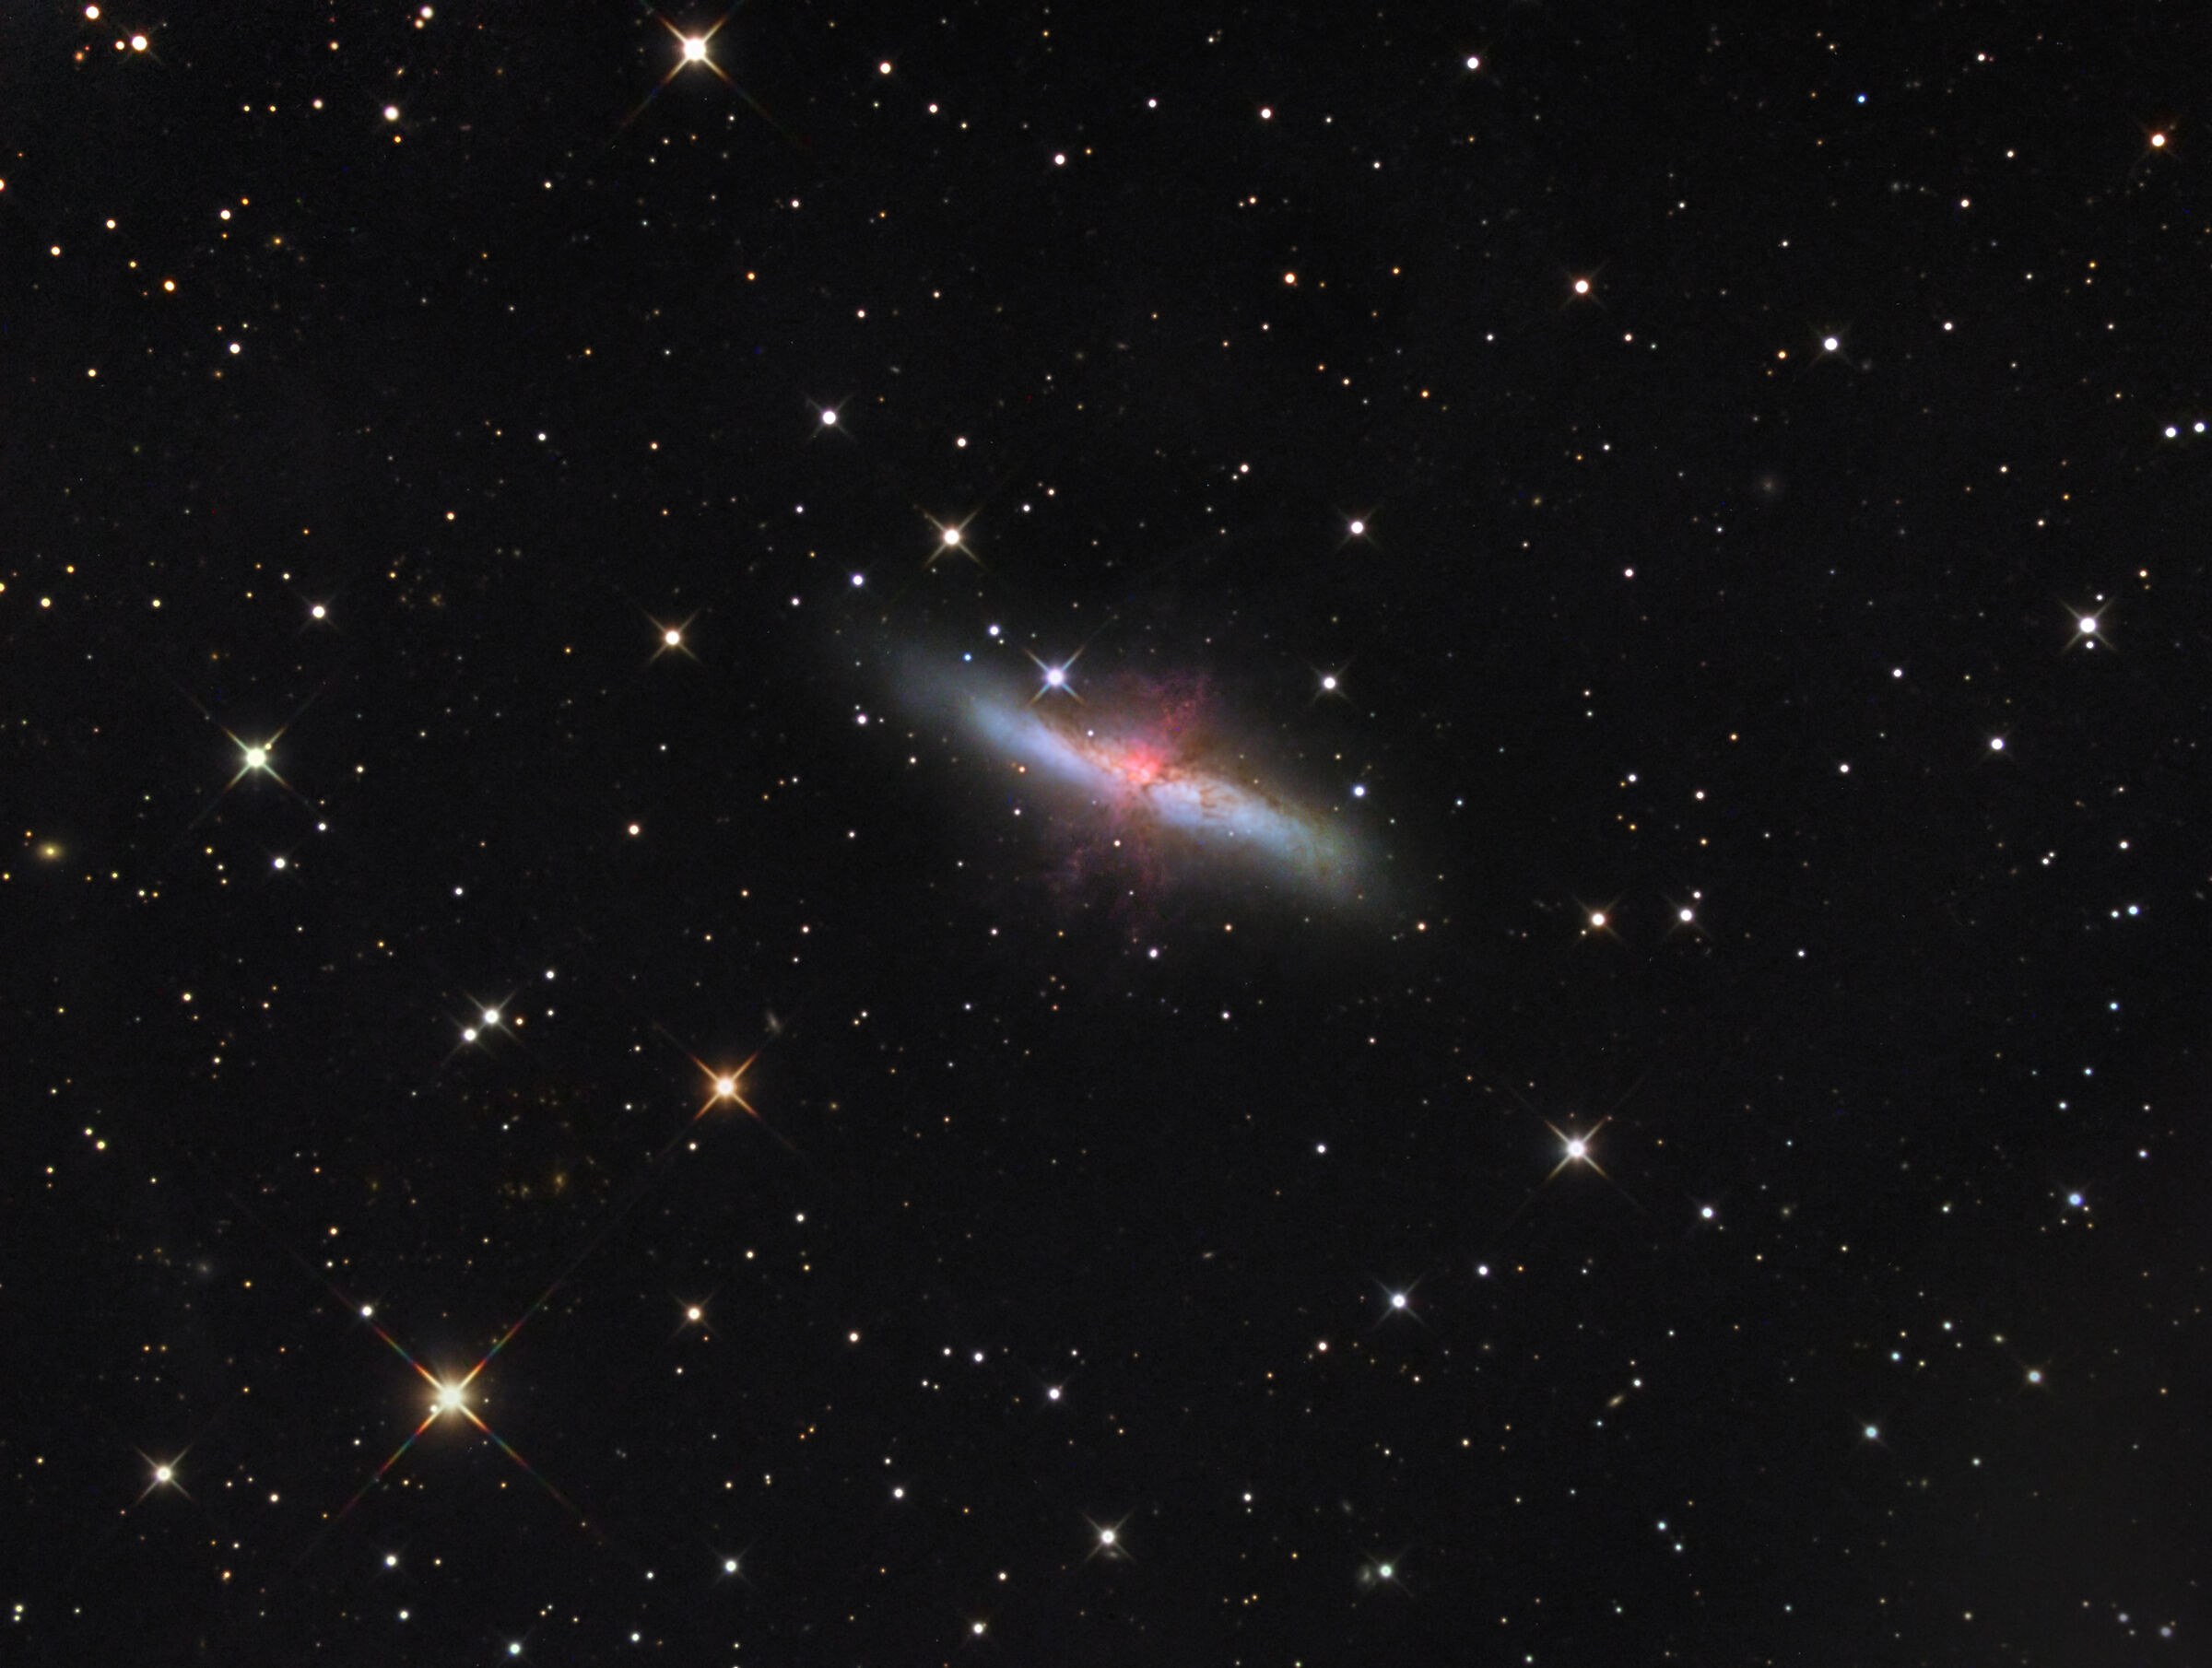 Cigar Galaxy also known as M 82 or NGC 3034 ...